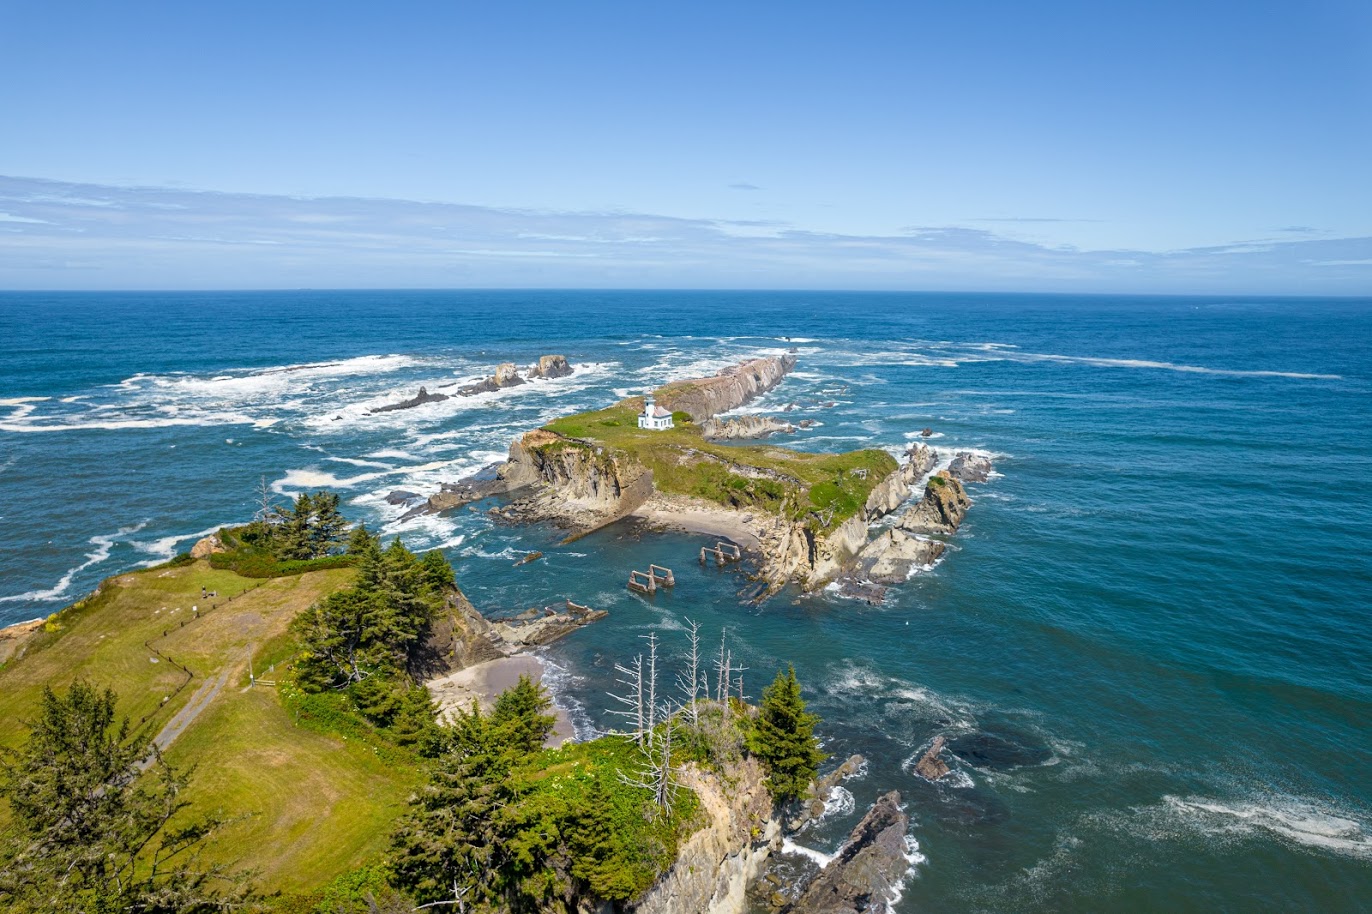 The Cape Arago Lighthouse on an island in the Pacific Ocean.